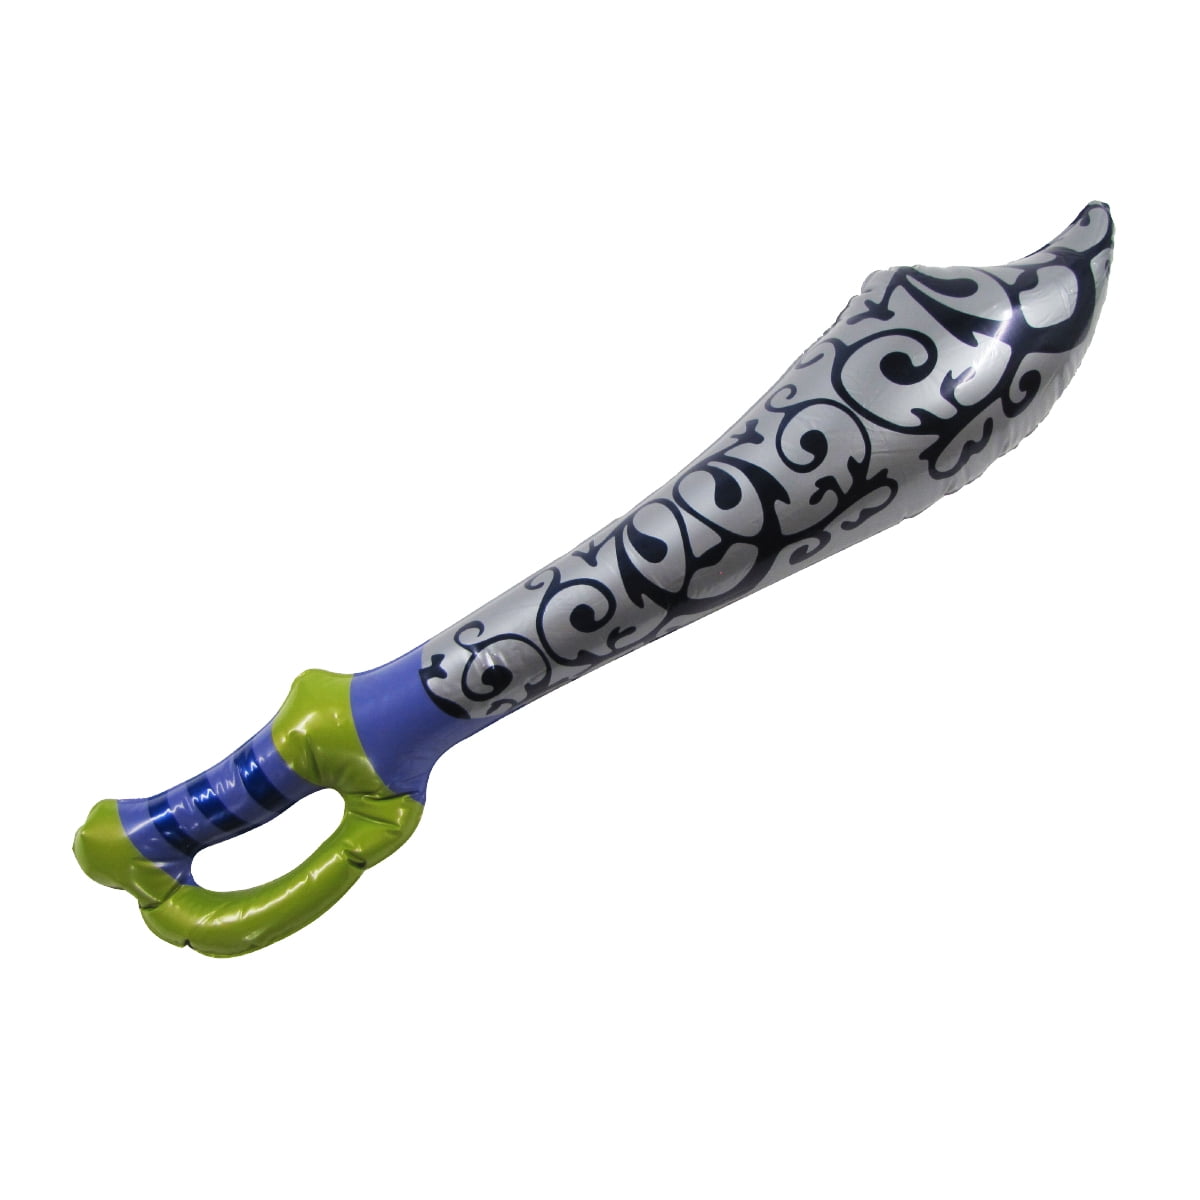 INFLATABLE BLOW-UP TOY-SNAKE FLAMBERGE SWORD UNDULATING BLADE-KIDS-CHILDREN 